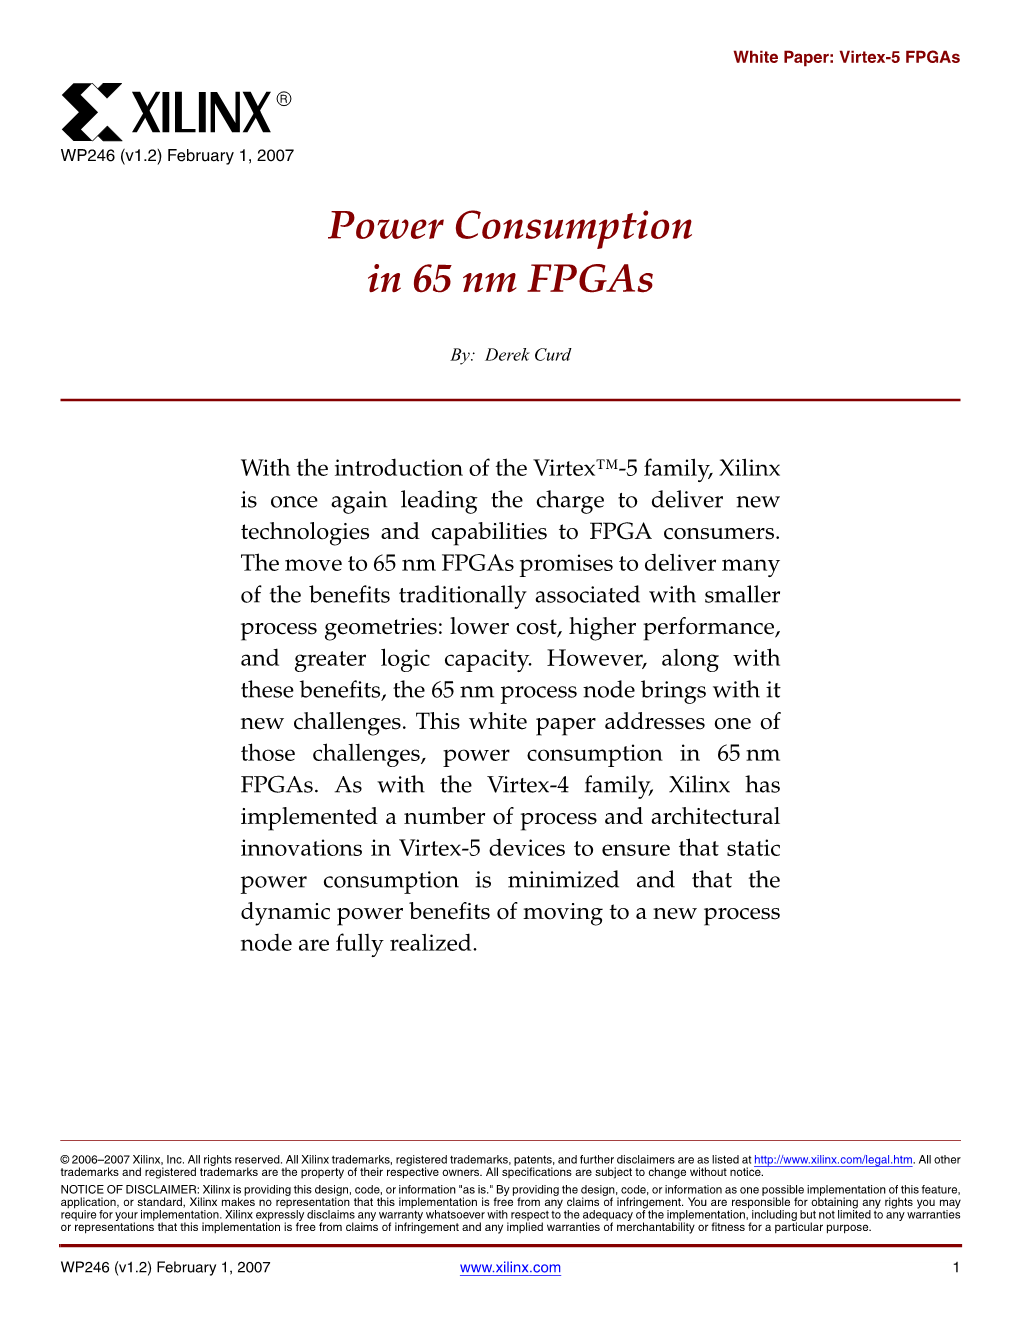 Xilinx, Power Consumption in 65Nm Fpgas, White Paper